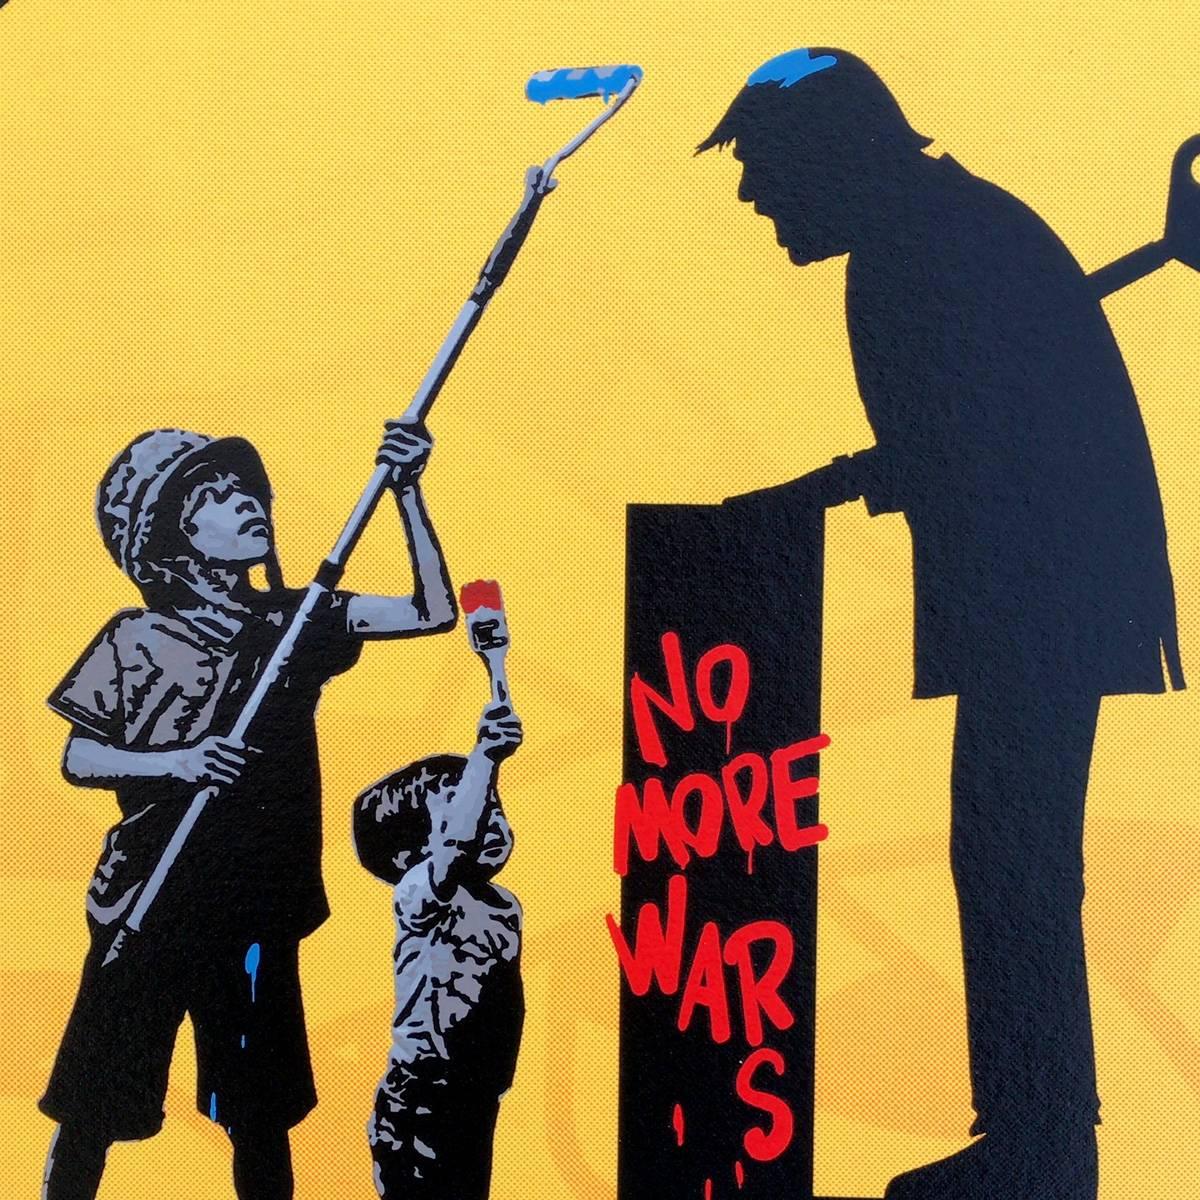 No More Wars - Print by Roamcouch